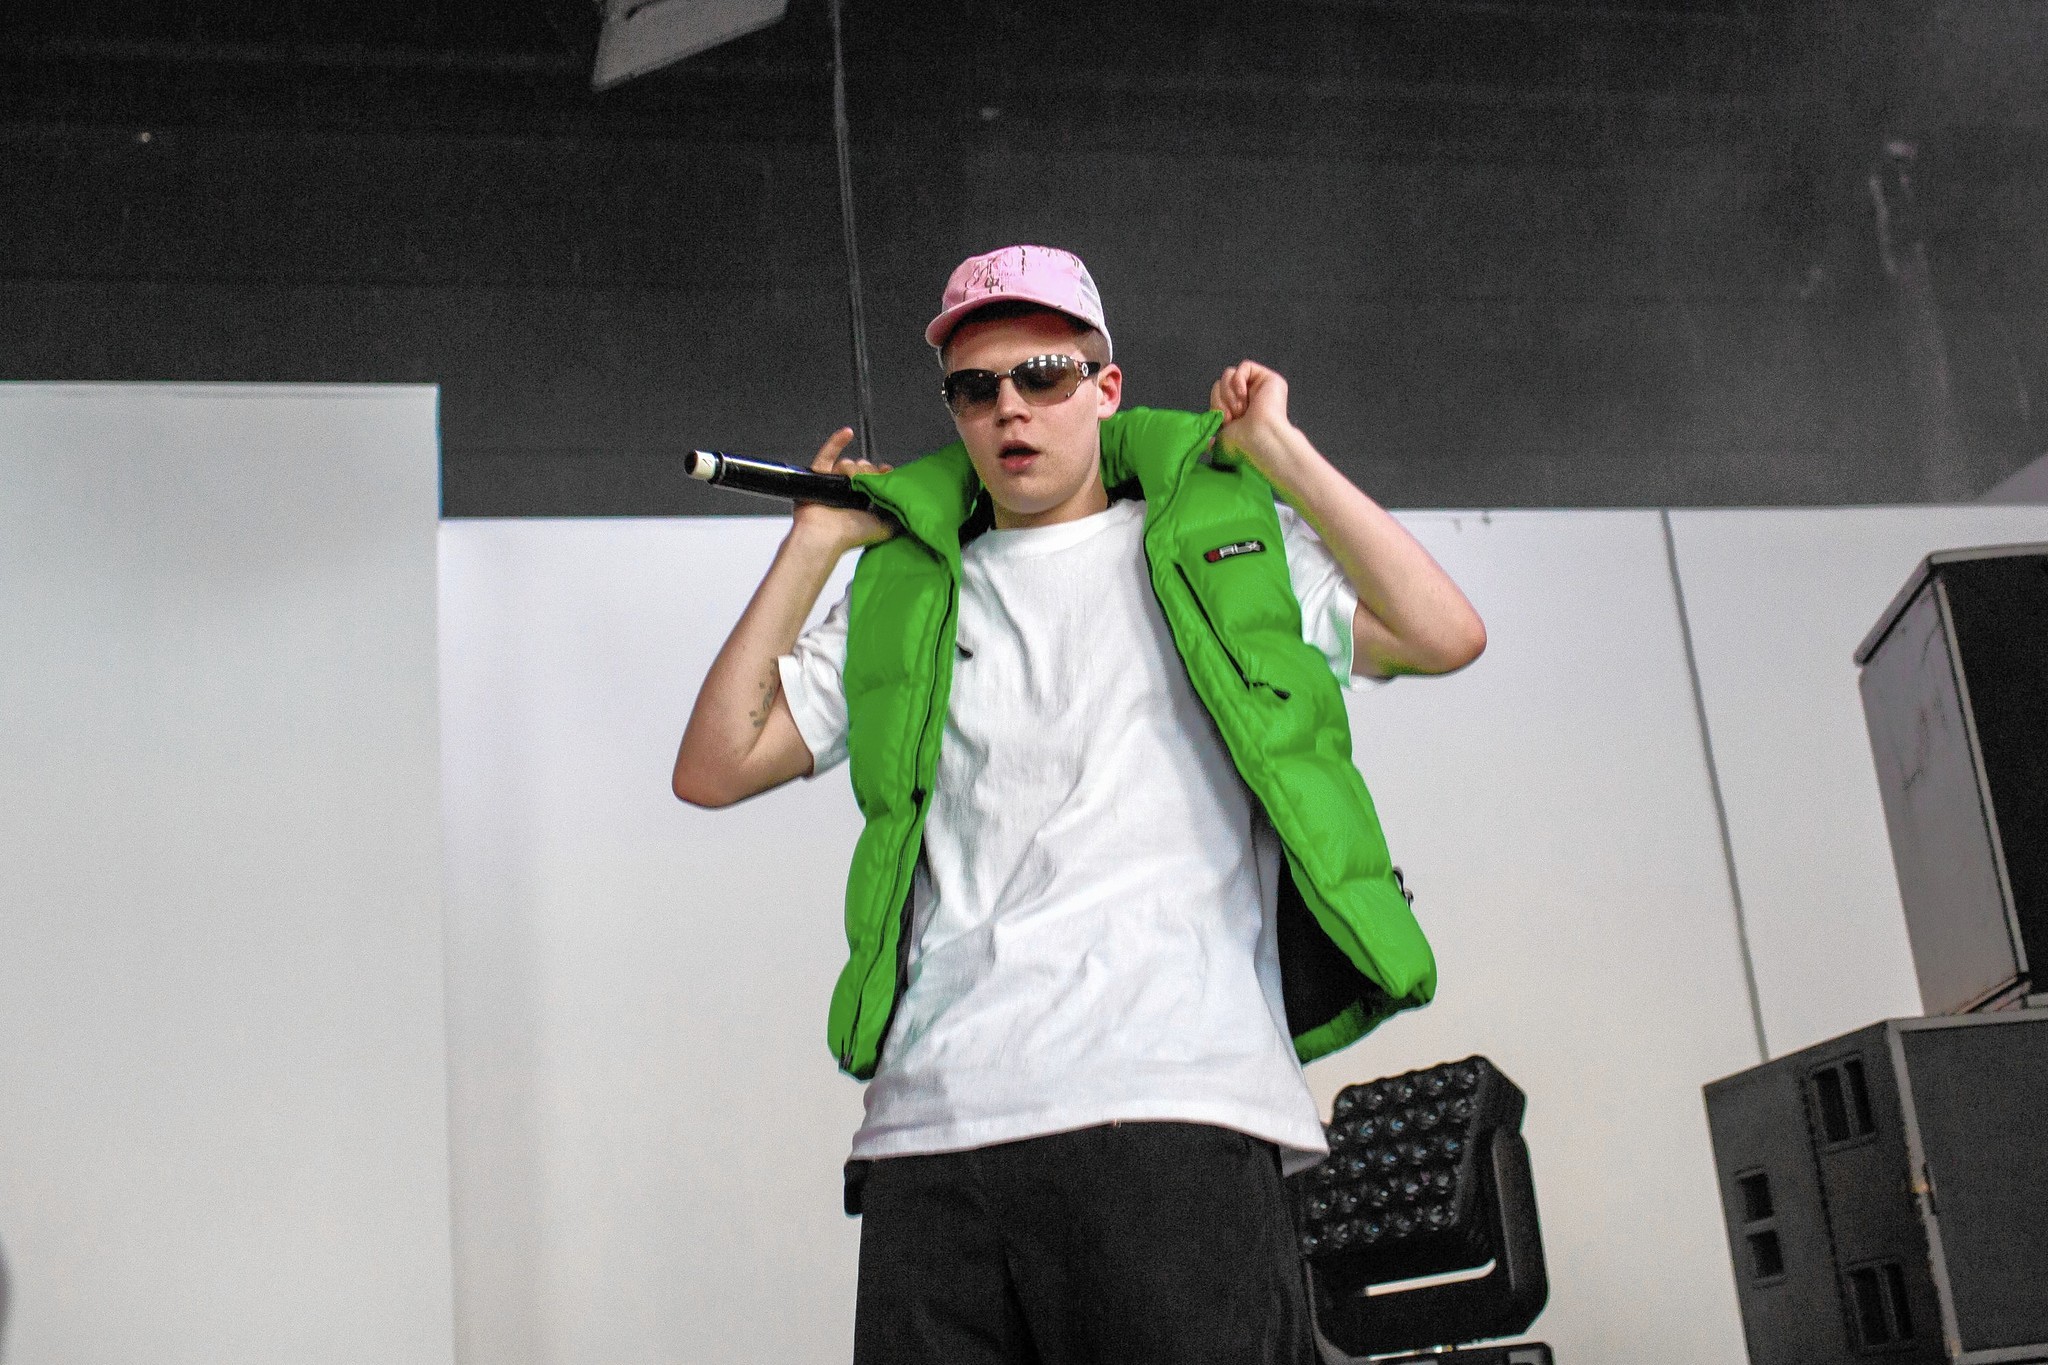 Yung Lean is, at present, having a moment - Chicago Tribune